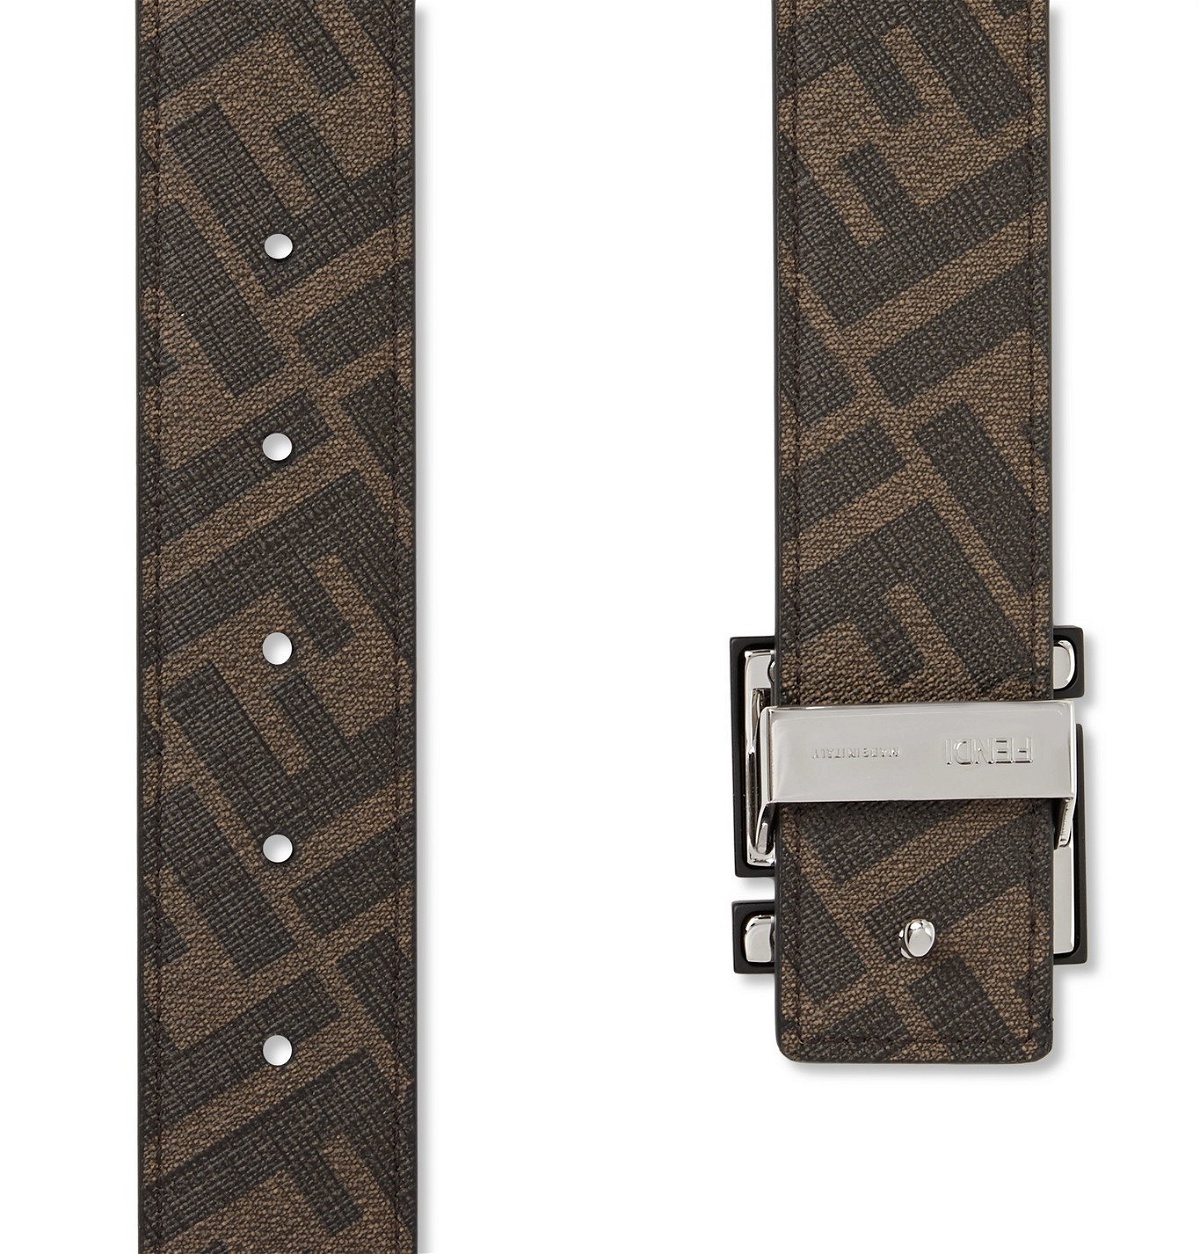 FENDI: belt in leather and coated cotton - Black